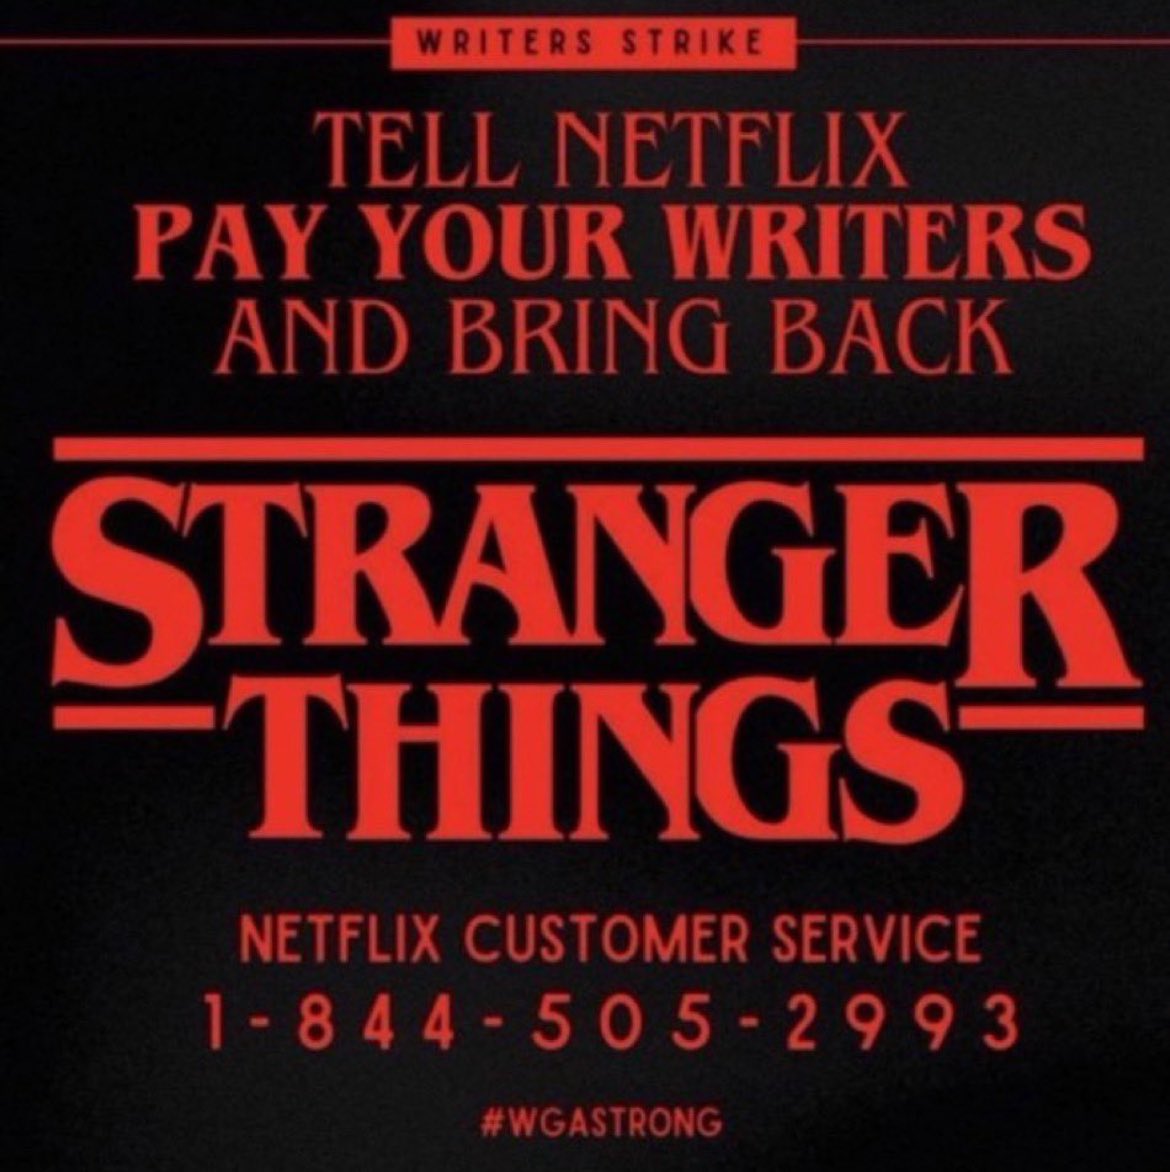 daily reminder for #Netflix to PAY YOUR WRITERS‼️without them, you won’t have any new shows to release, and that means no money coming your way‼️
#StrangerFansForWGA #WGASTRONG #StrangerThings5 #WGA #PAYYOURWRITERS